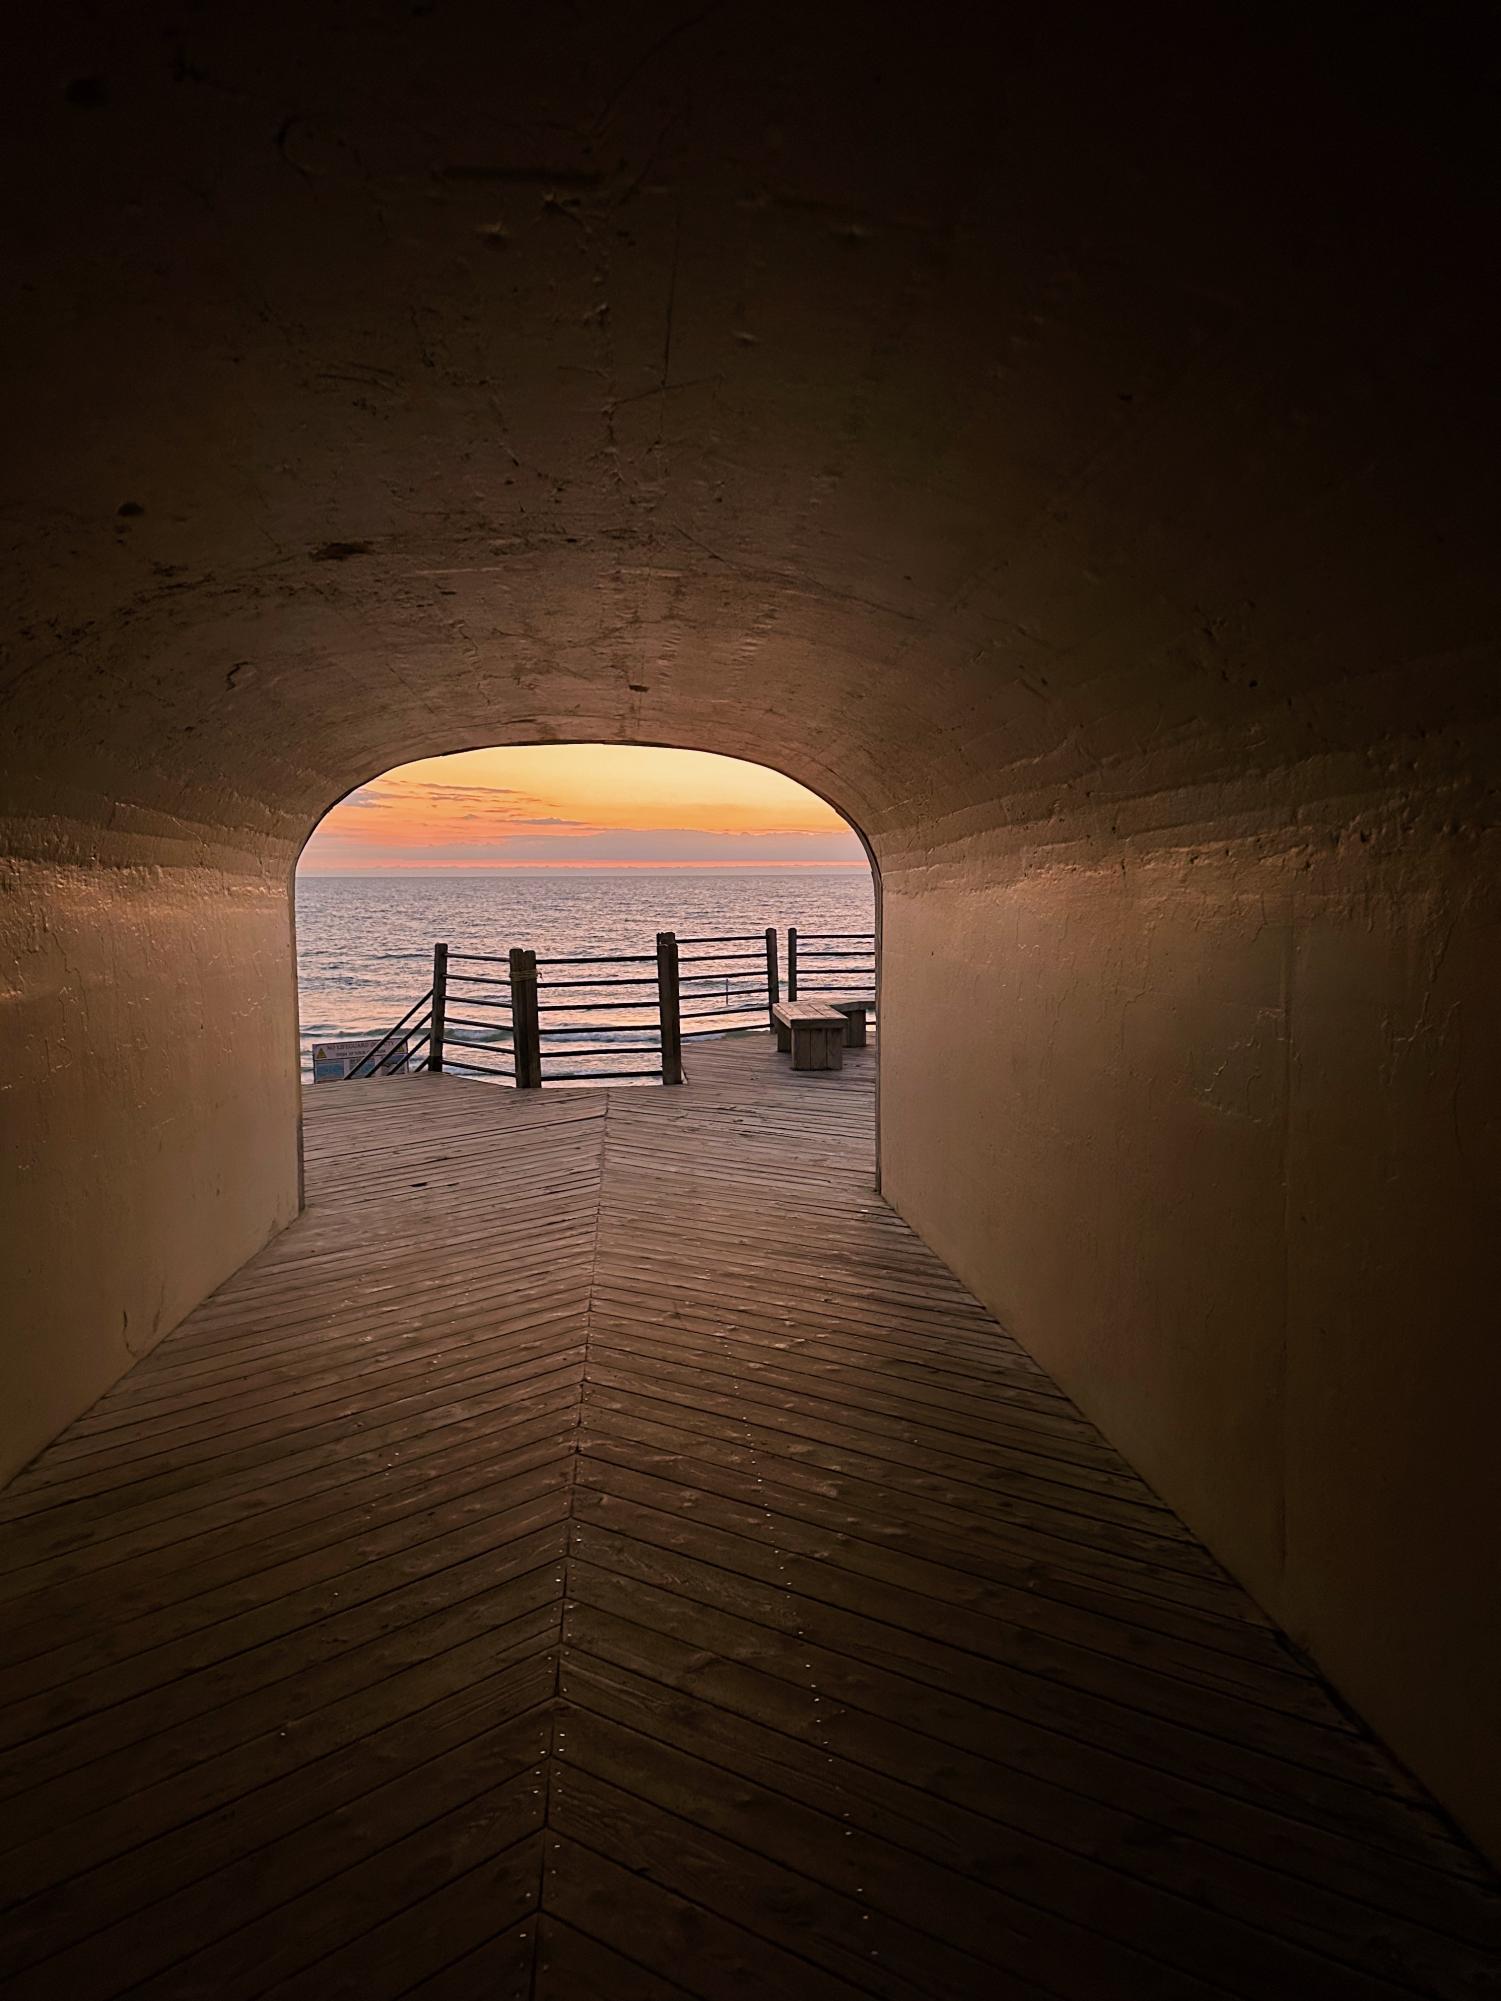 Tunnel Park in Holland is a popular beach that attracts many visitors for lake activities or relaxing in the sun. Tourists and locals visit at dusk to watch the beautiful sunset over Lake Michigan. 